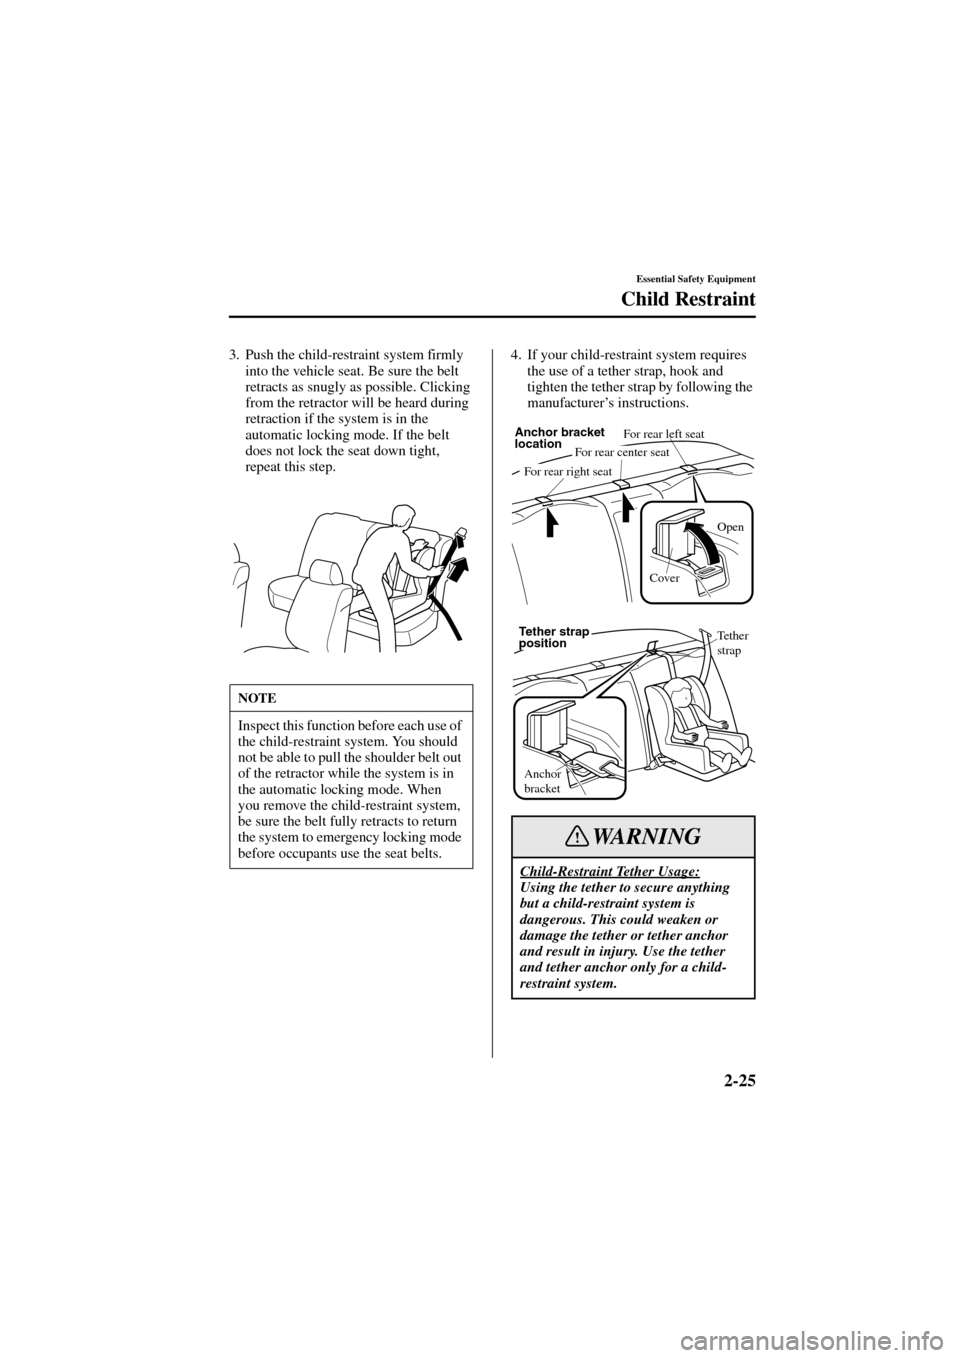 MAZDA MODEL 6 2004   (in English) Service Manual 2-25
Essential Safety Equipment
Child Restraint
Form No. 8R29-EA-02I
3. Push the child-restraint system firmly 
into the vehicle seat. Be sure the belt 
retracts as snugly as possible. Clicking 
from 